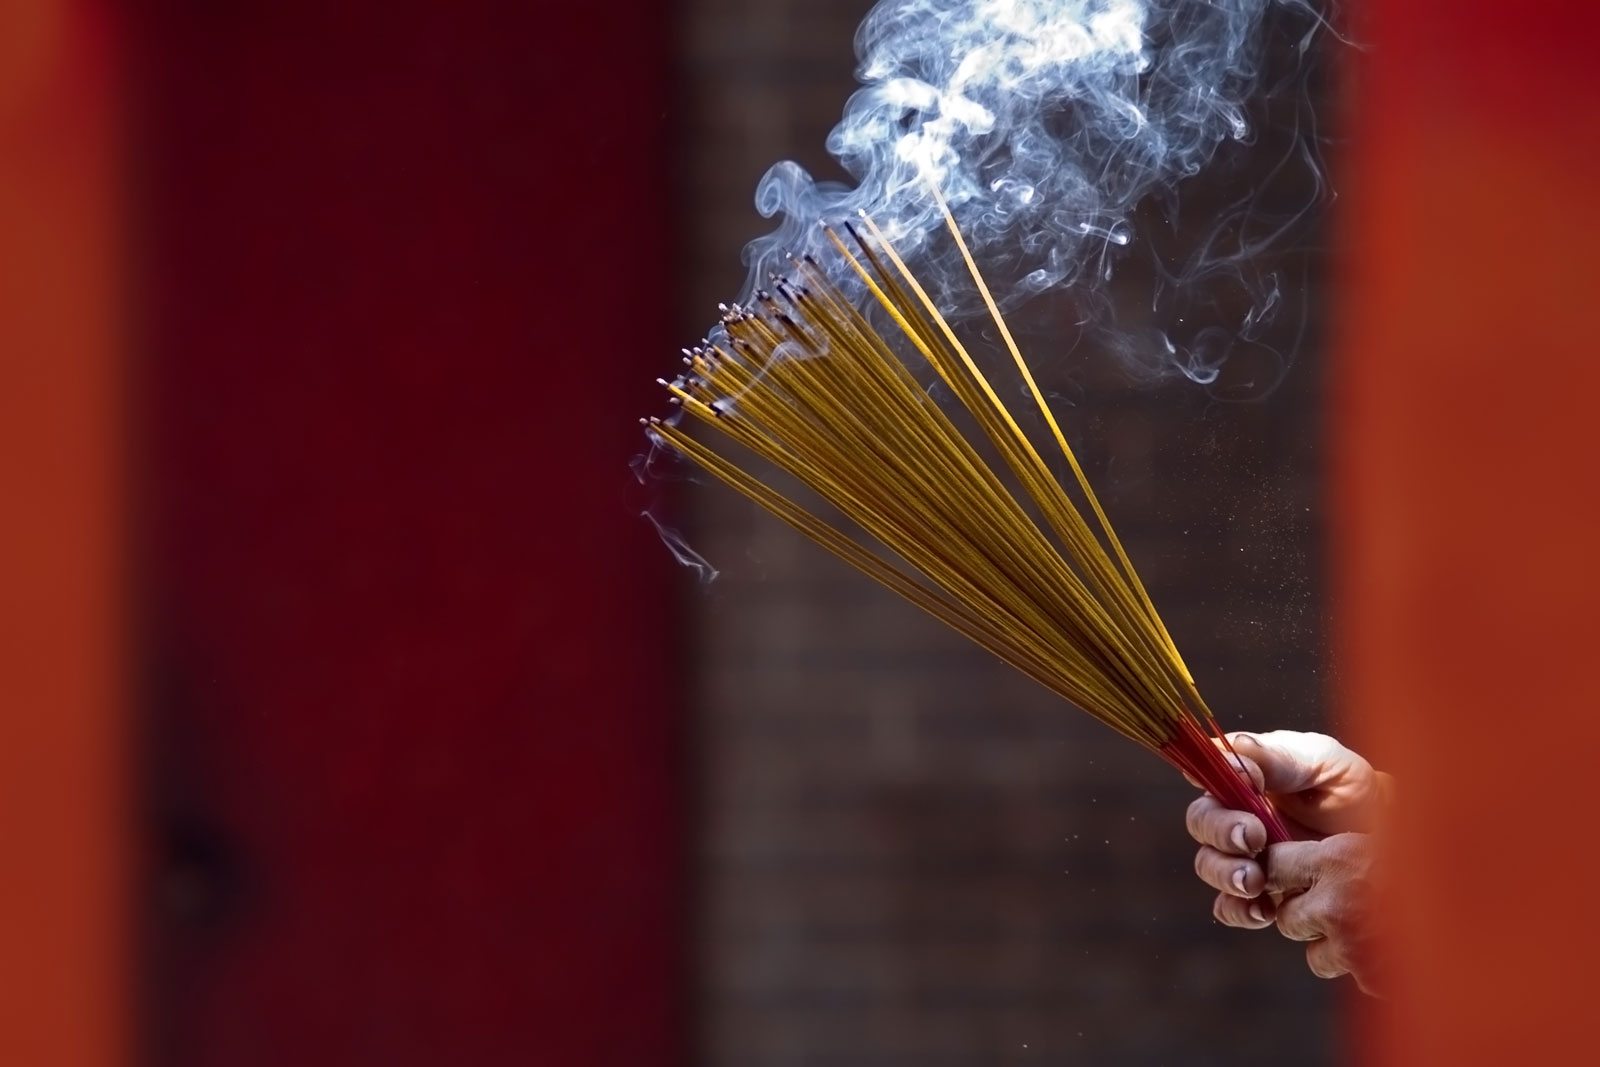 Burning incense at a temple in Ho Chi Minh City, Vietnam